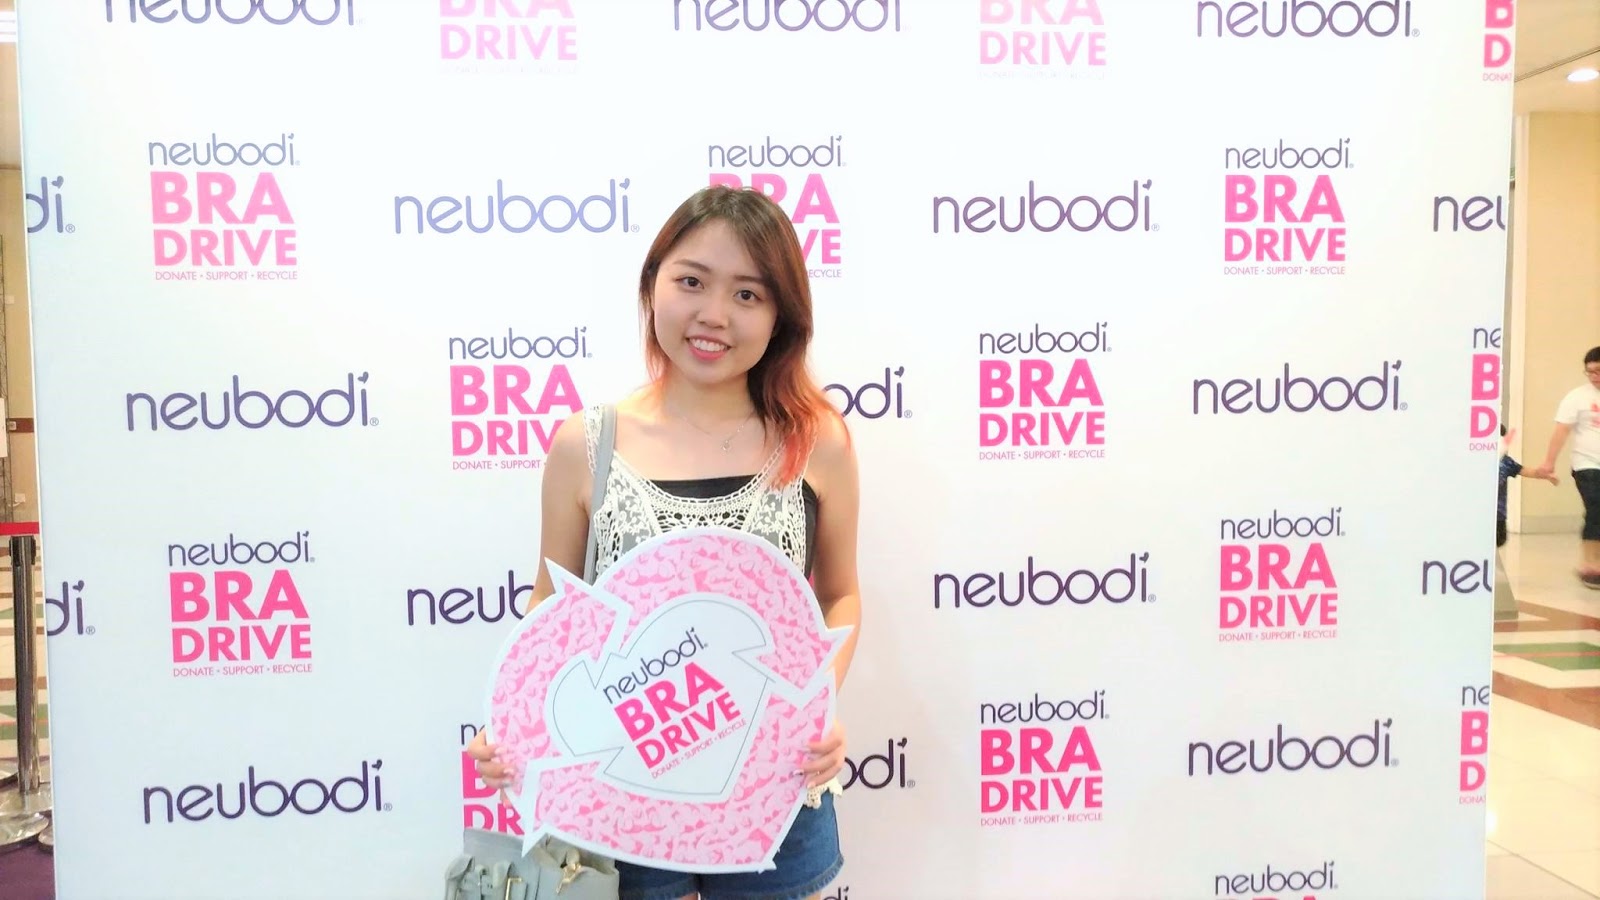 Its time for our famous bra donation drive again 💕 Save on your